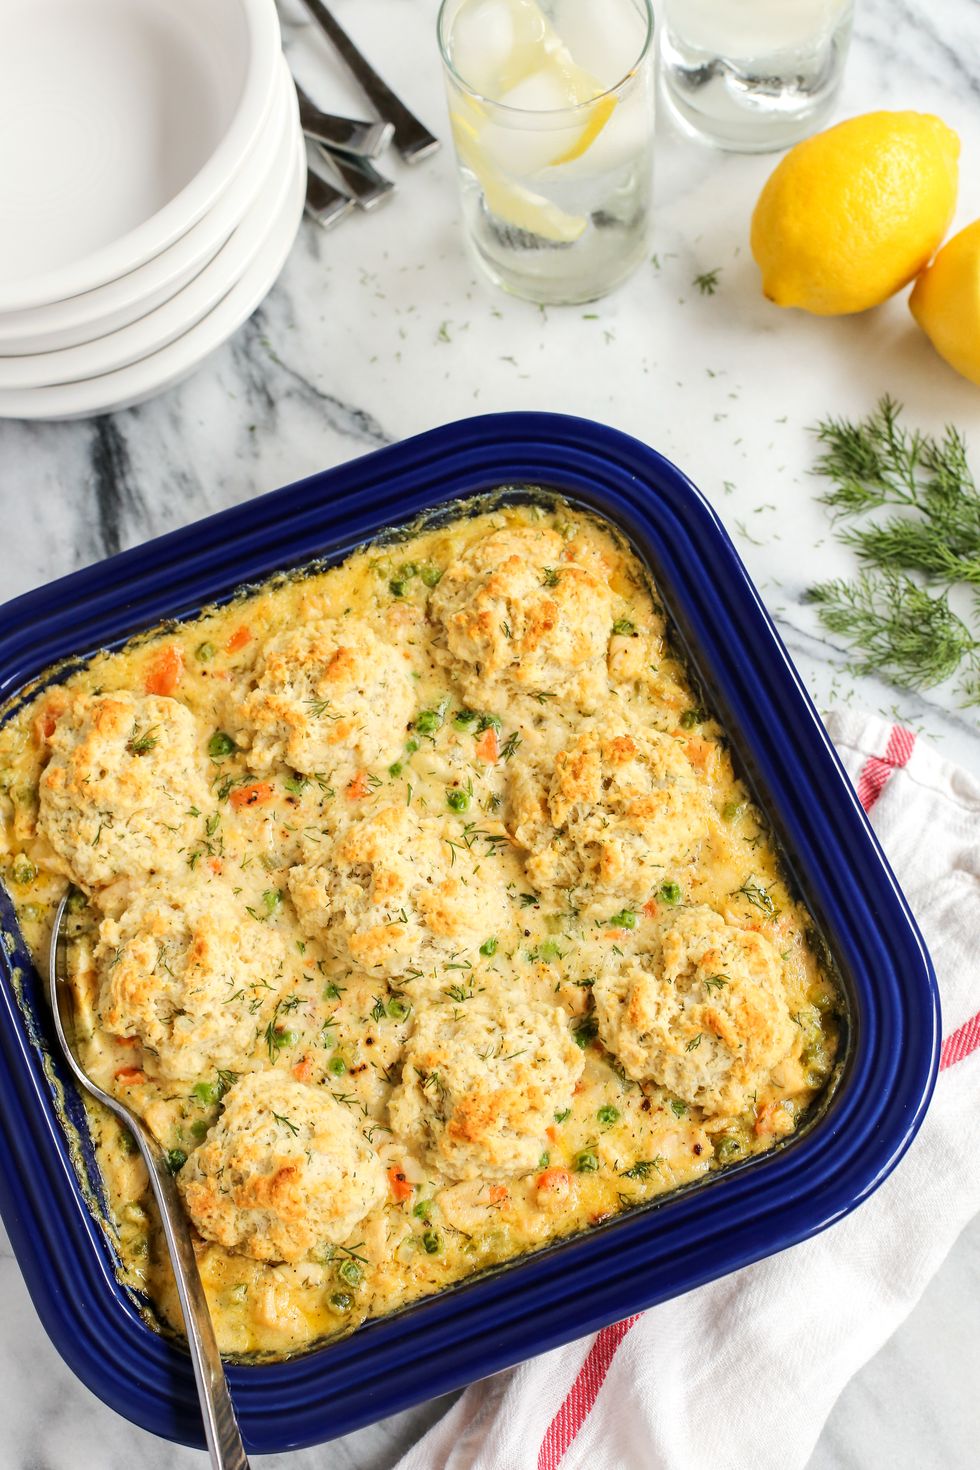 Turkey and Biscuits Casserole with Lemon and Dill